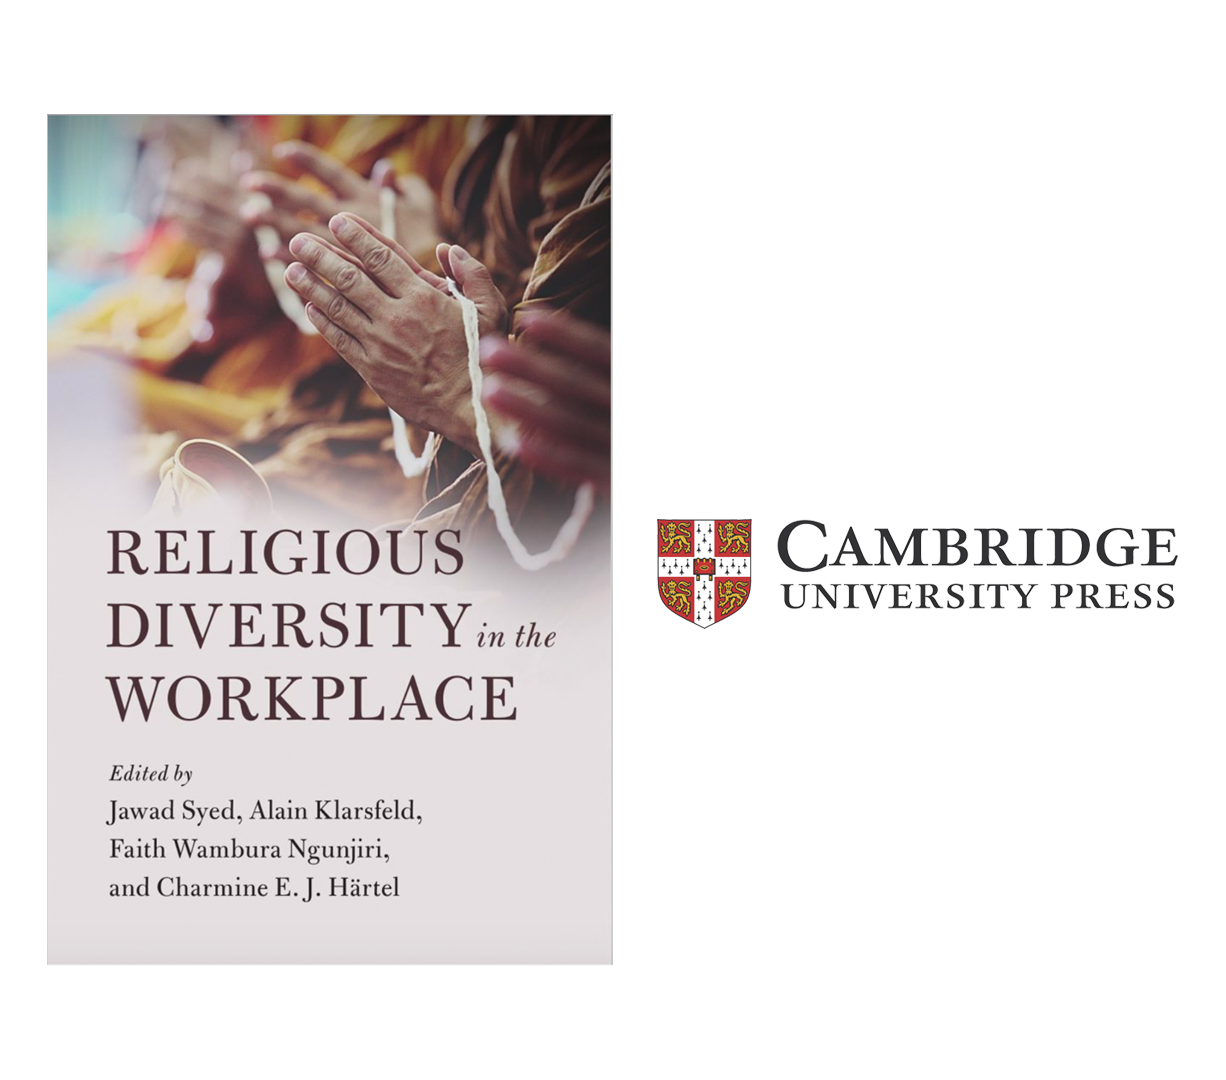 Religious Diversity in the workplace